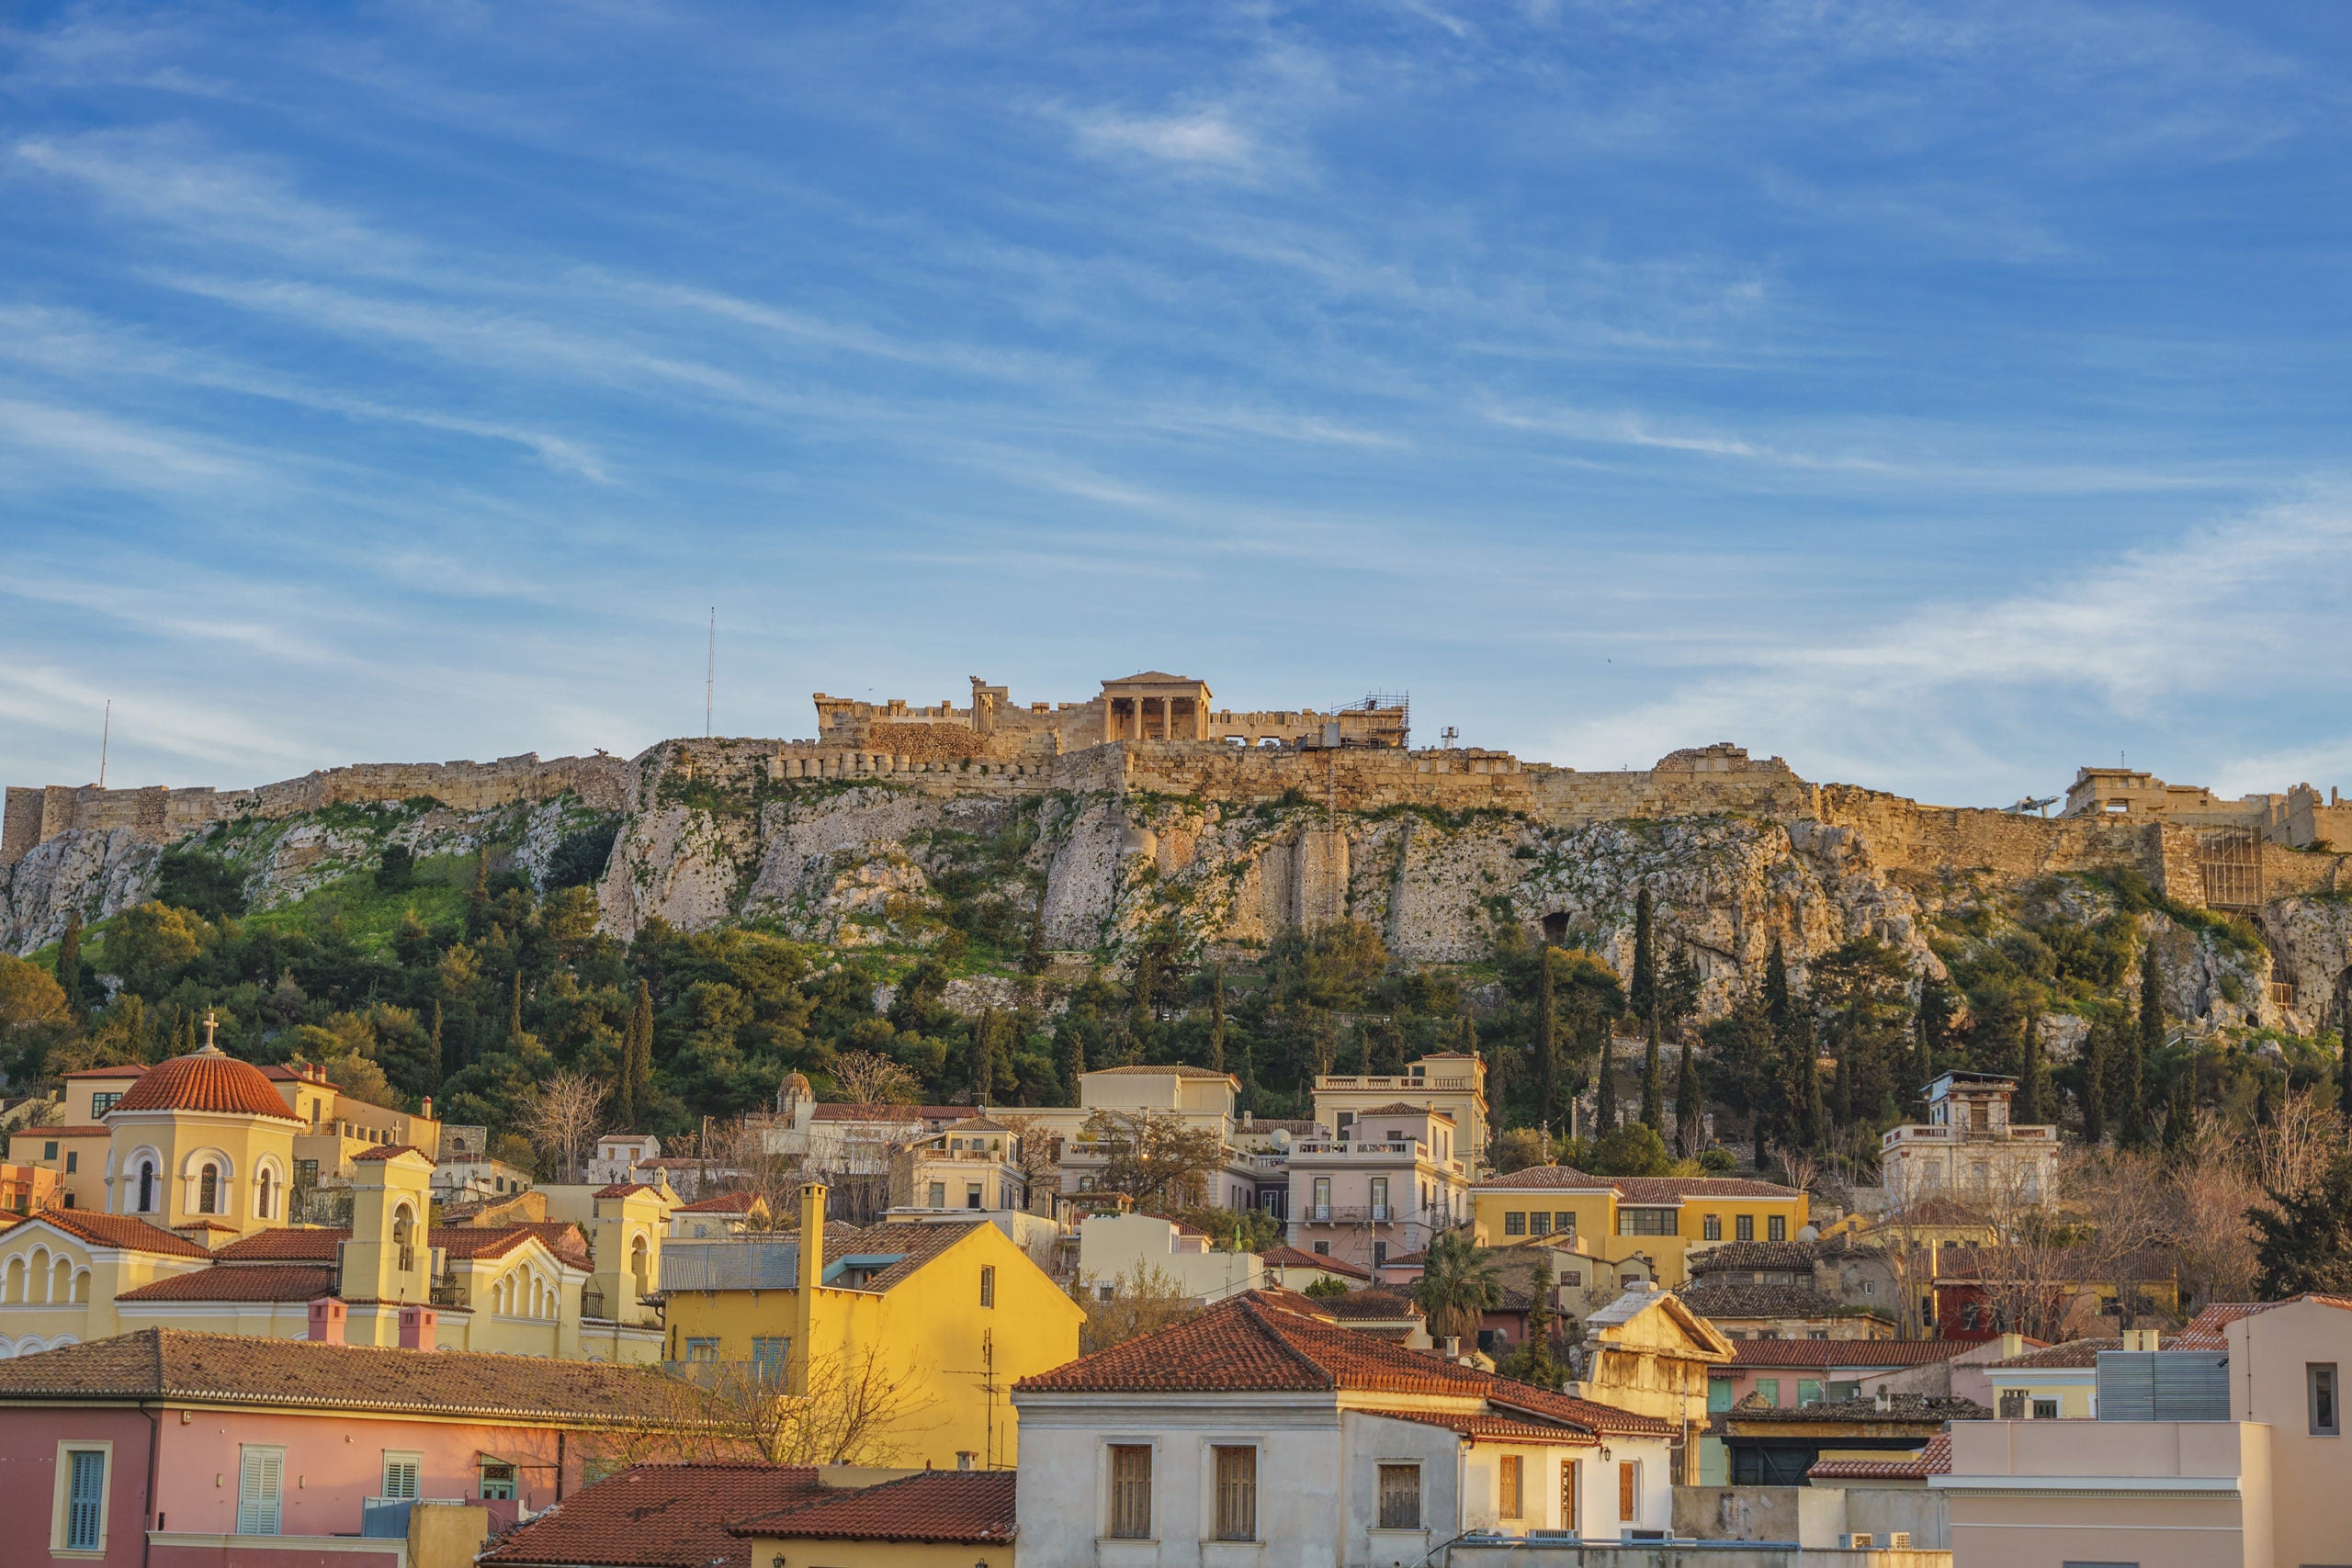 Andy Hayler on the Cuisine of Athens